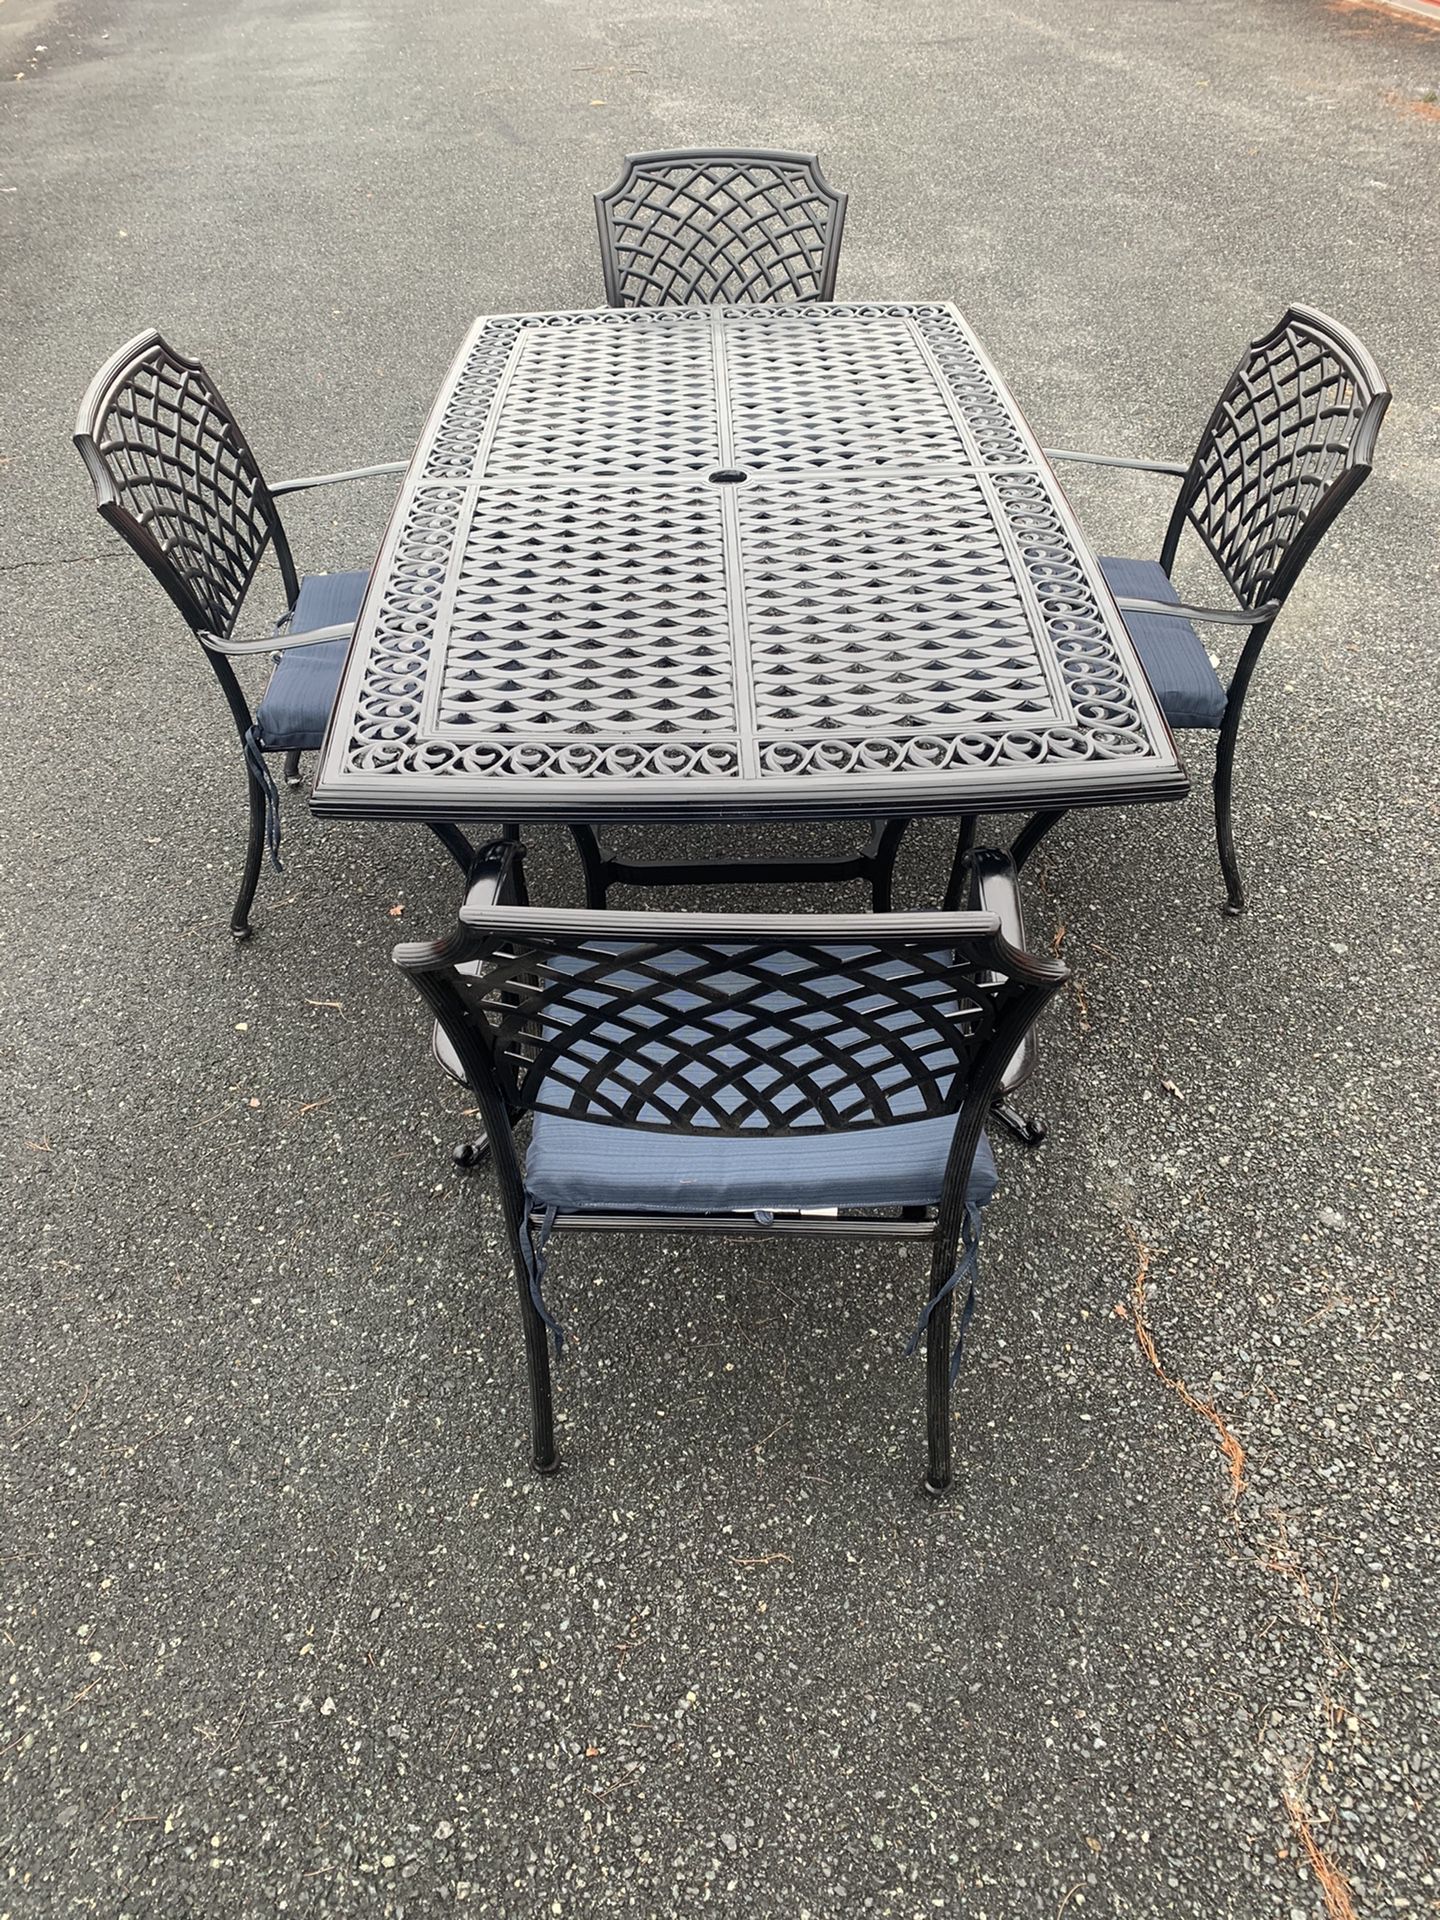 Gorgeous Heavy Aluminum Patio Set Large Table and 4 Chairs